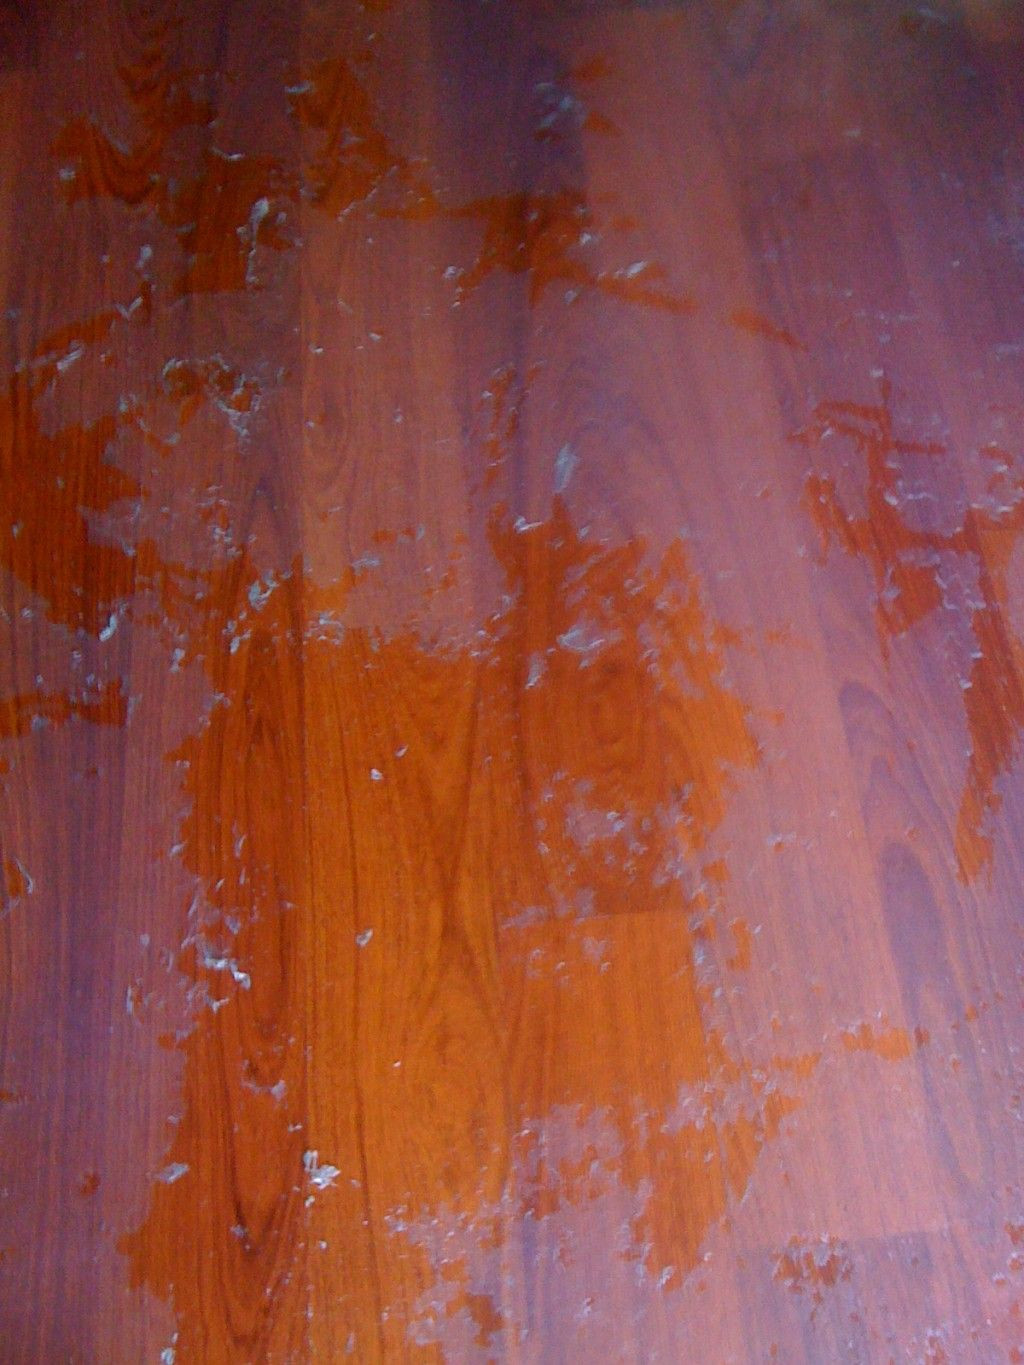 bruce hardwood floor cleaning products of how to remove wax and oil soap cleaners from wood floors recipes pertaining to how to remove oily or wax build up from cleaning or polishing solutions from wood floors